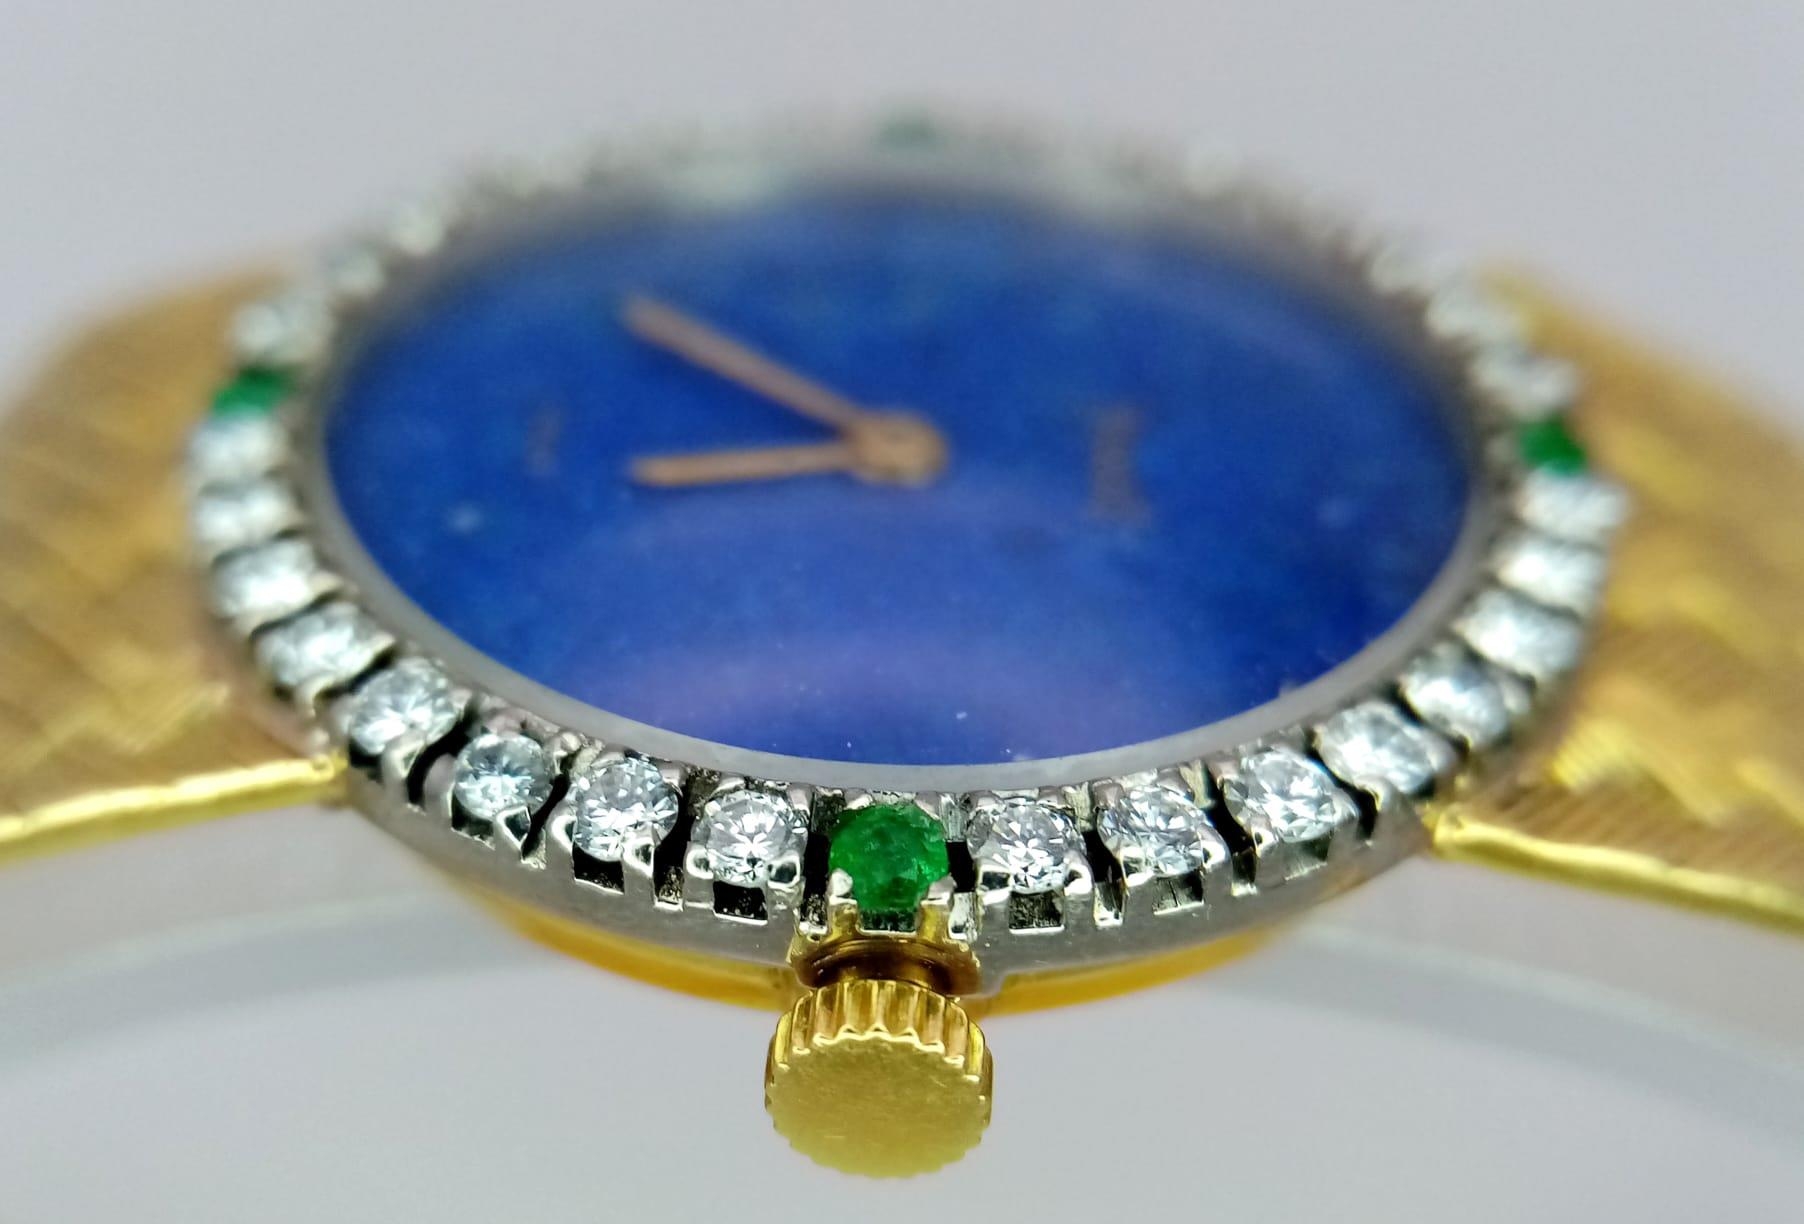 Vintage Ladies Piaget 18ct yellow gold watch, with a lapis lazuli dial (22mm) accented with a - Image 2 of 8